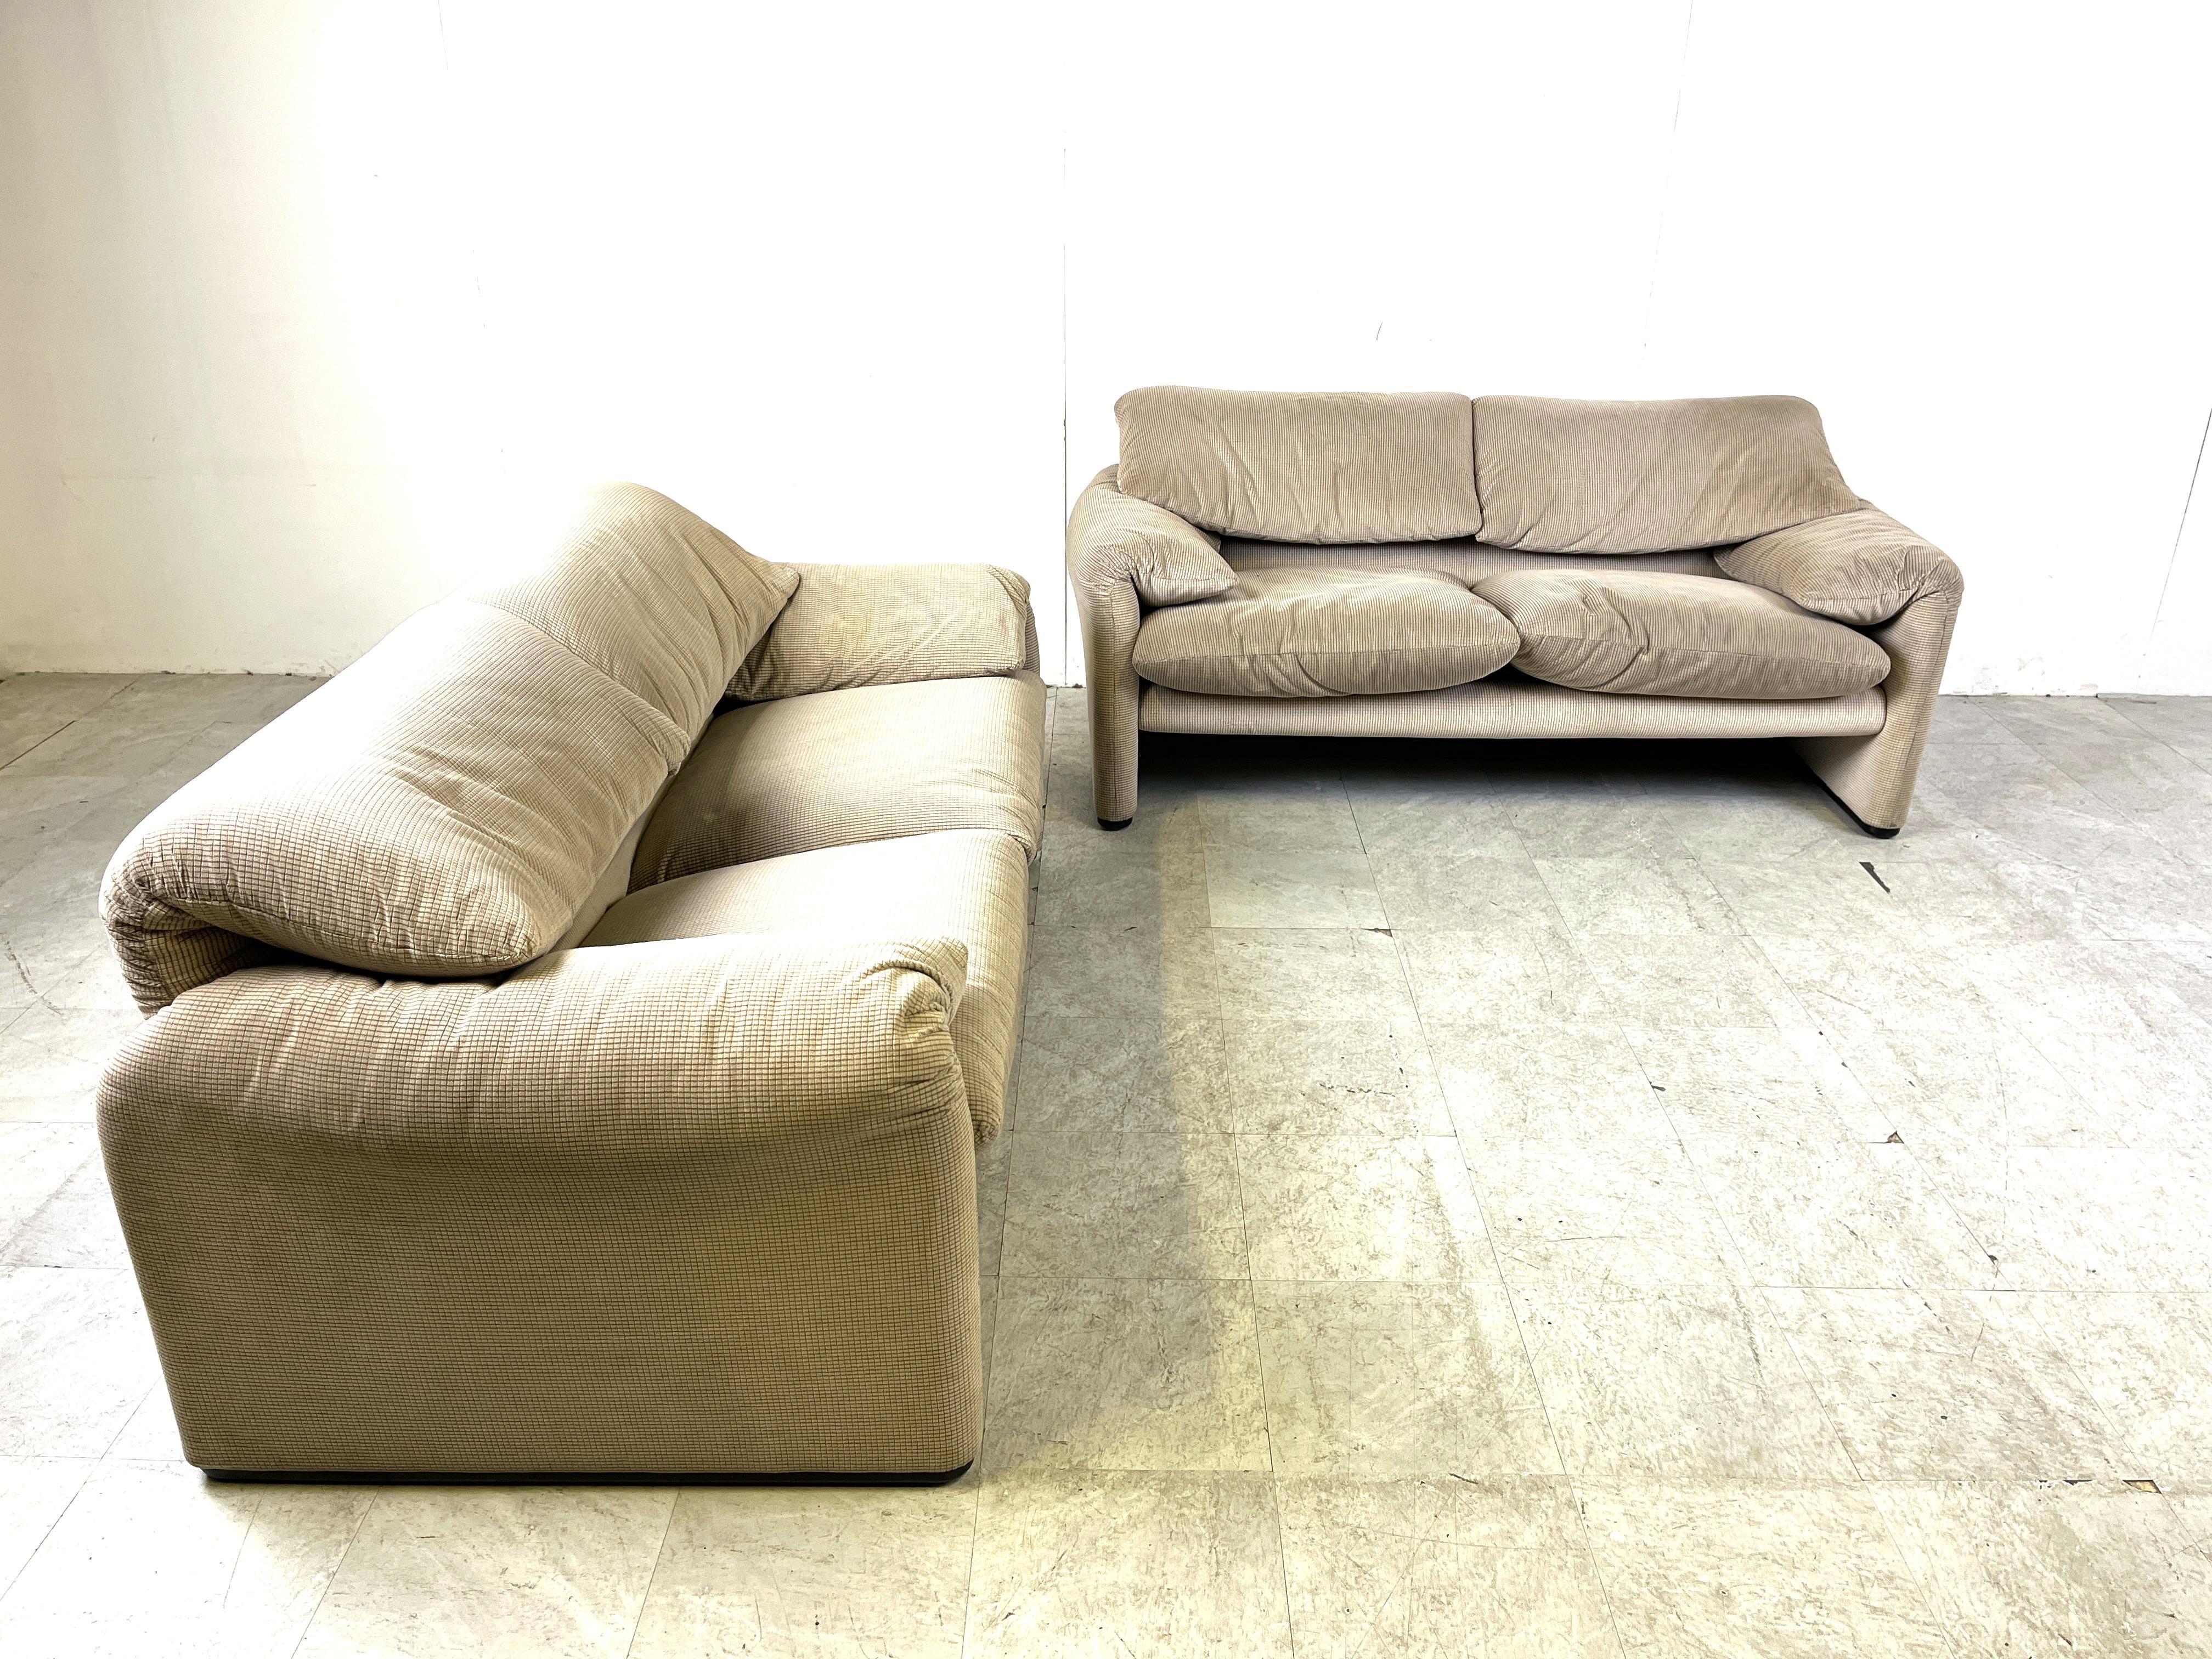 Vintage maralunga sofa, set of 2, designed by Vico Magistretti for Cassina in 1973.

This iconic design sofa is upholstered in its original beige upholstery. Labelled

The backrests are adjustable.

1970s- Italy

Very good condition

Dimensions
H 28